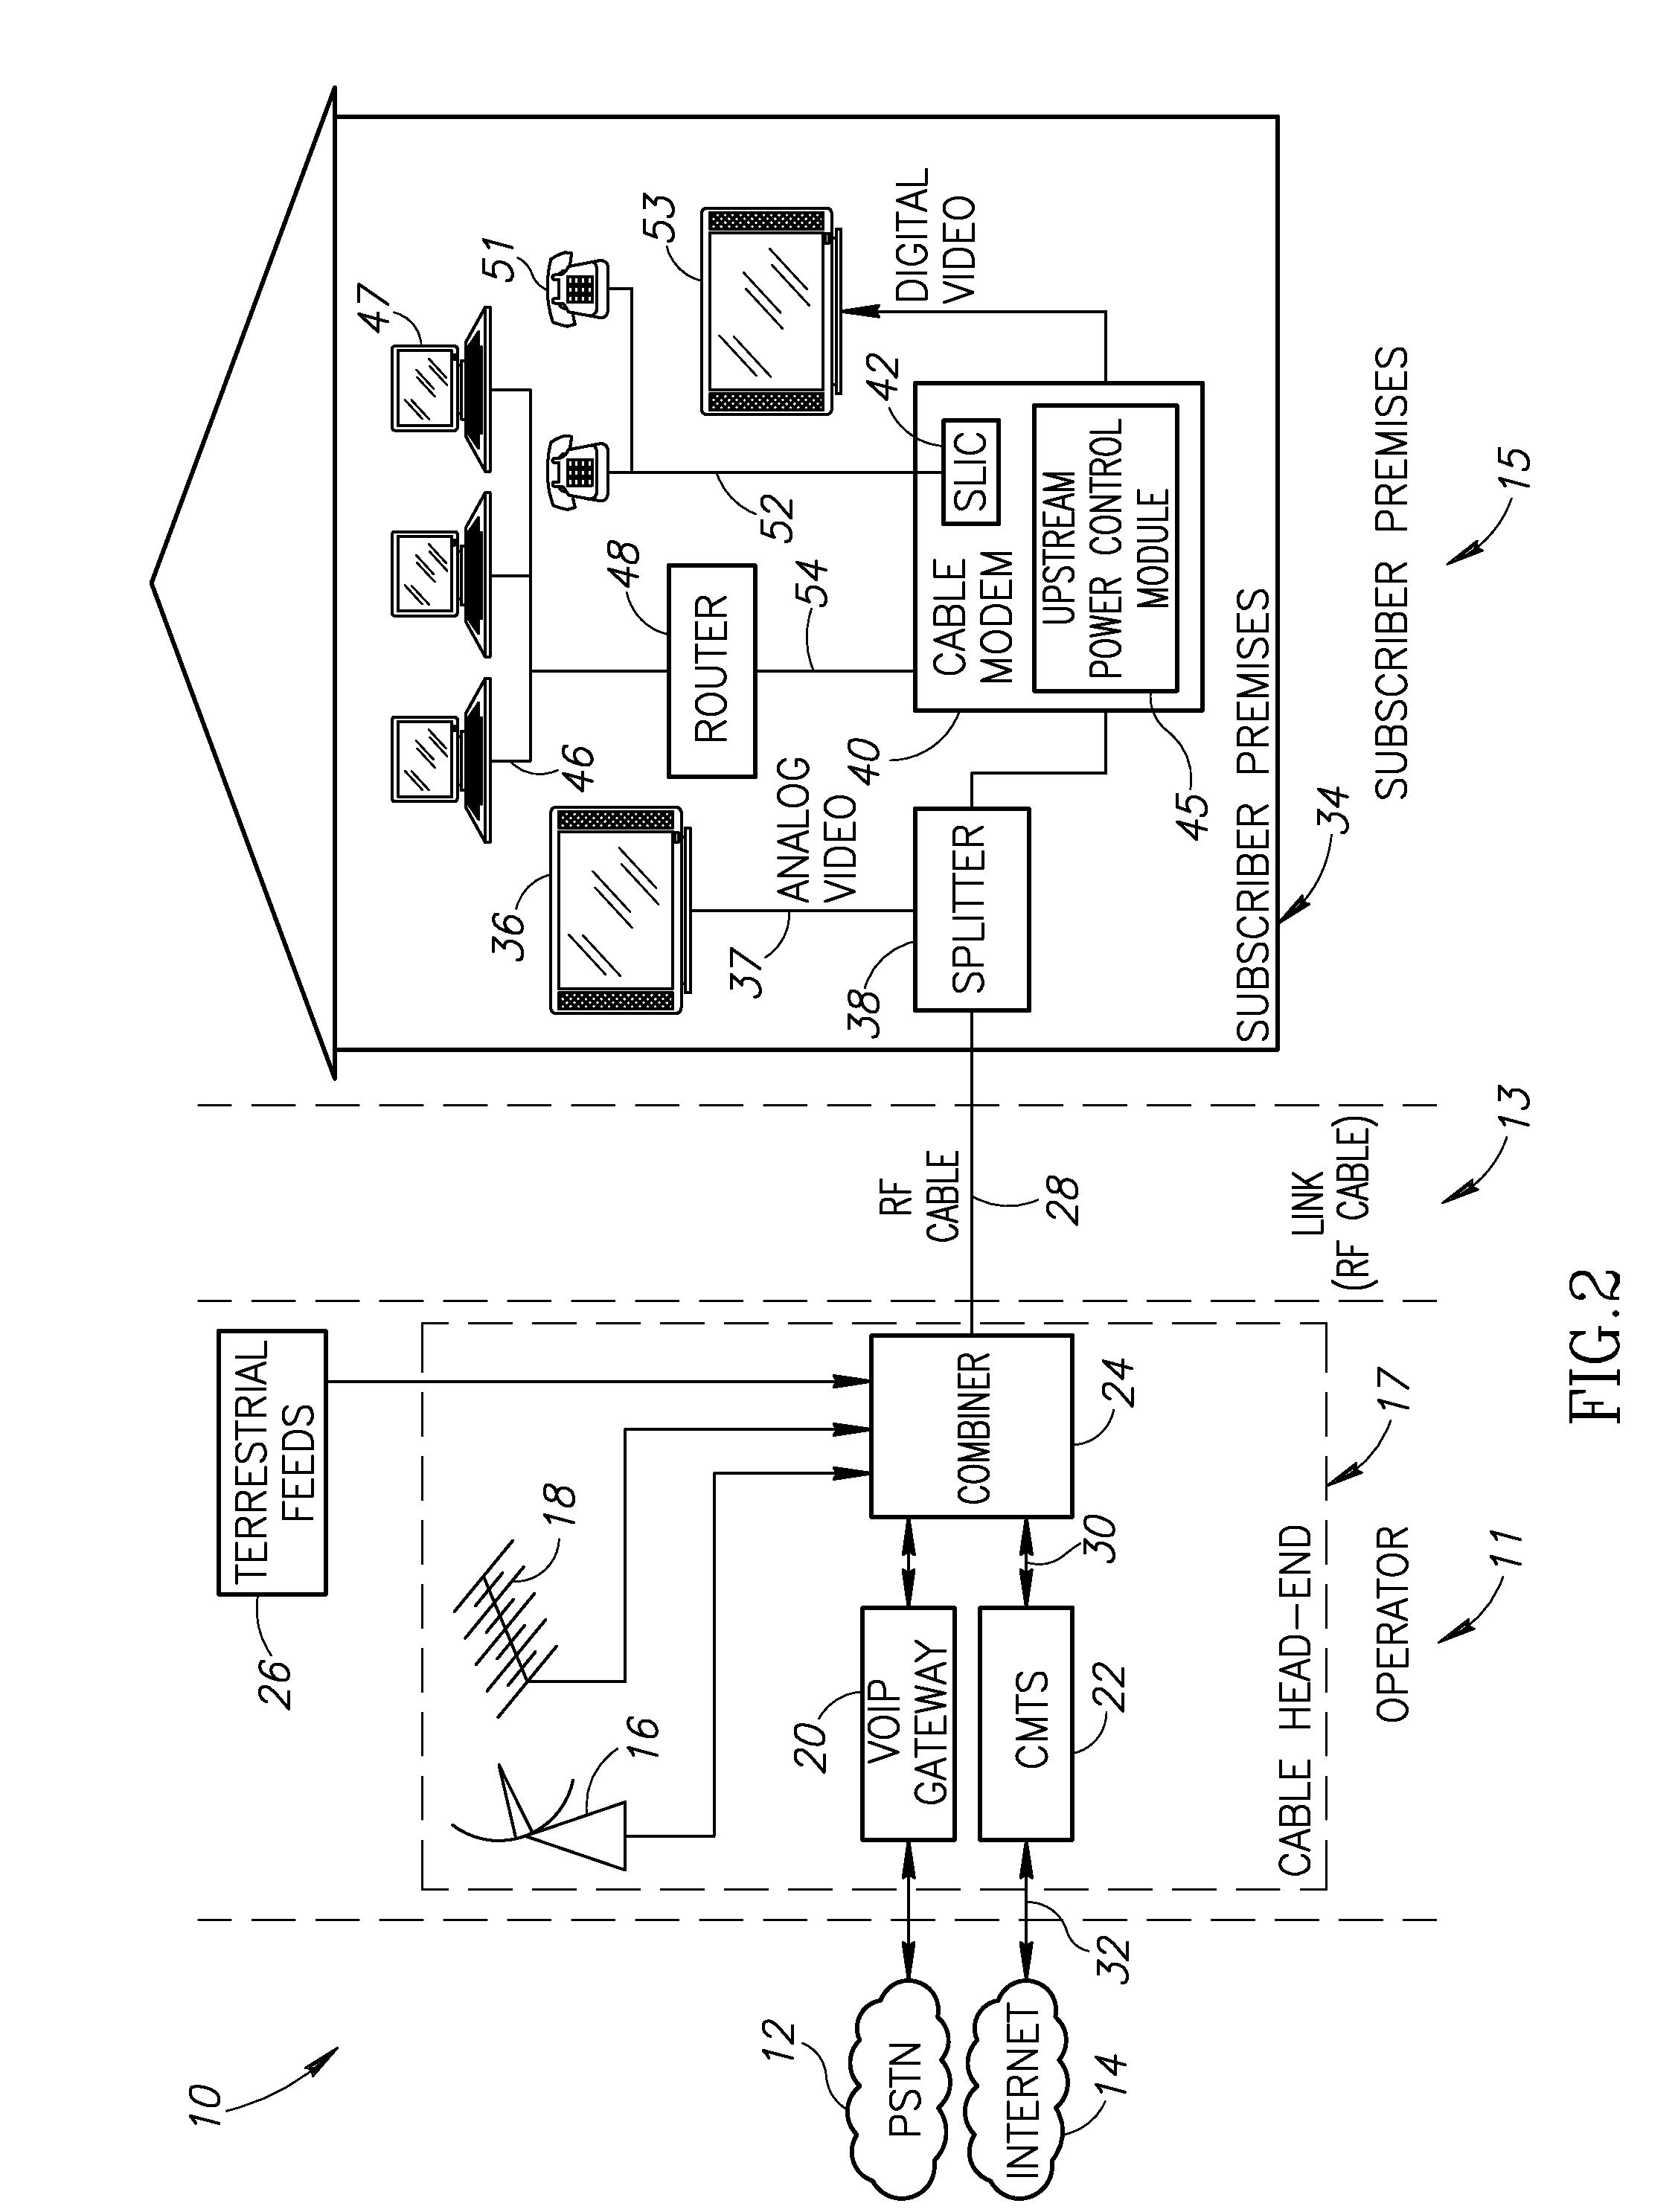 Upstream power control for multiple transmit channels